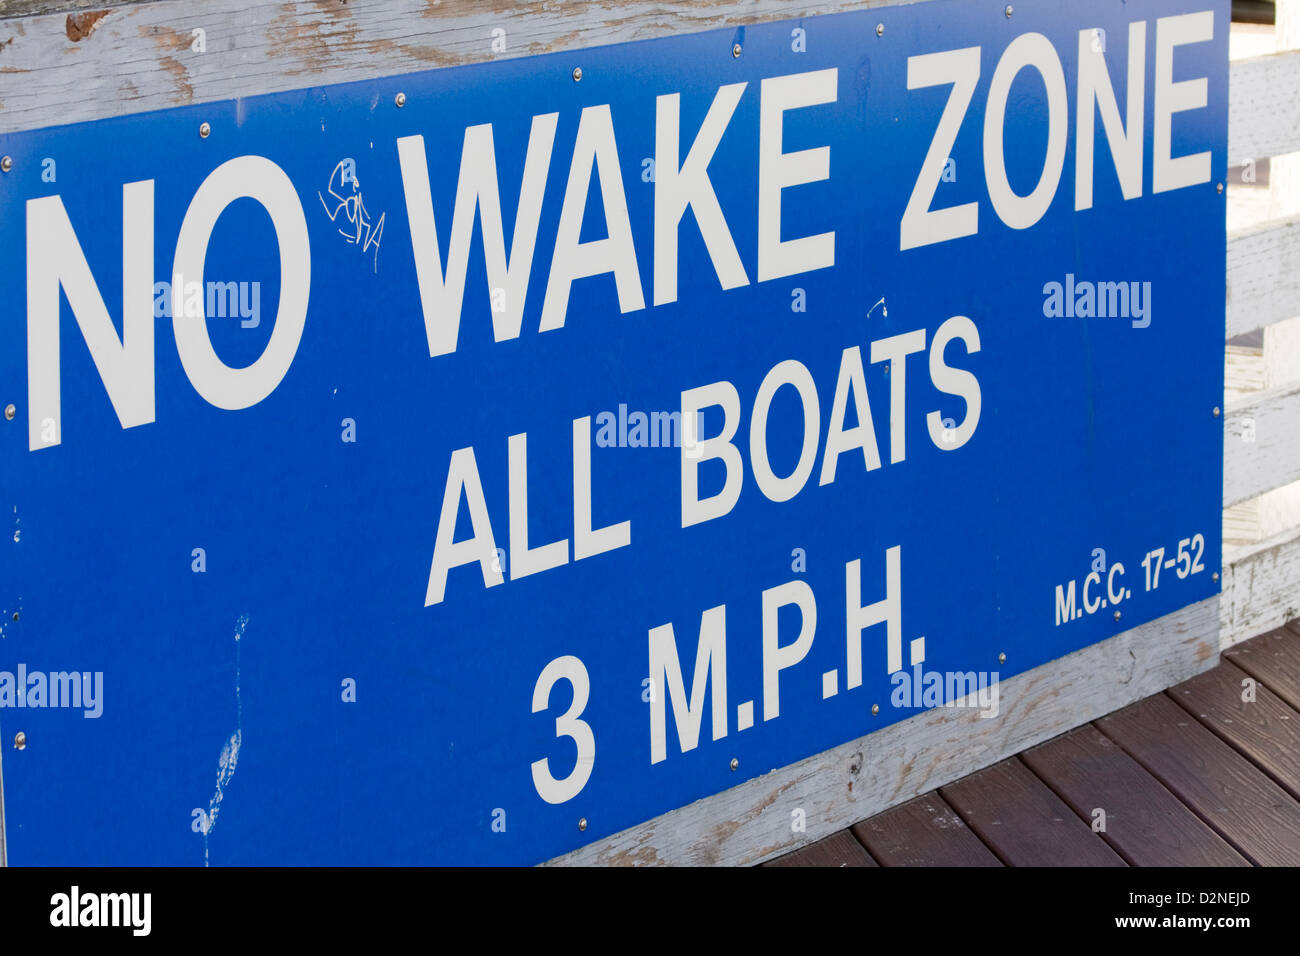 No Wake Zone All Boats 3 MPH sign found at Old Fisherman's Wharf, Monterey, CA Stock Photo